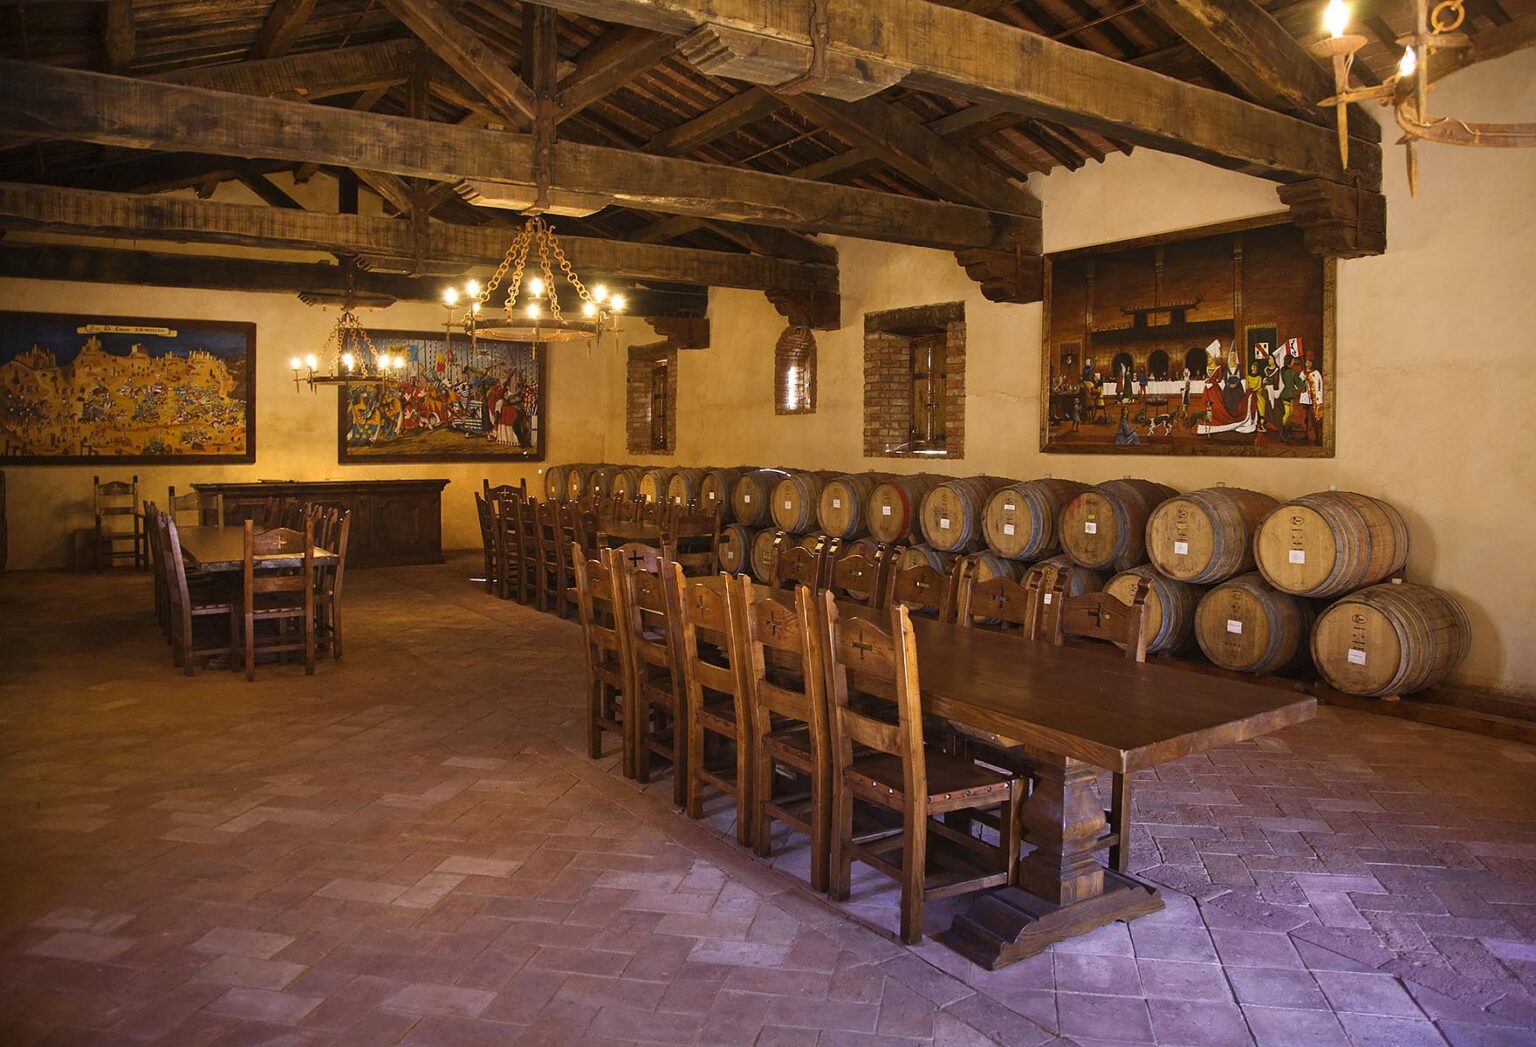 A BANQUET ROOM in CASTELLO DI AMAROSA, a WINERY housed by an authentic but recently constructed ITALIAN CASTLE located near CALISTOGA - NAPA VALLEY, CALIFORNIA